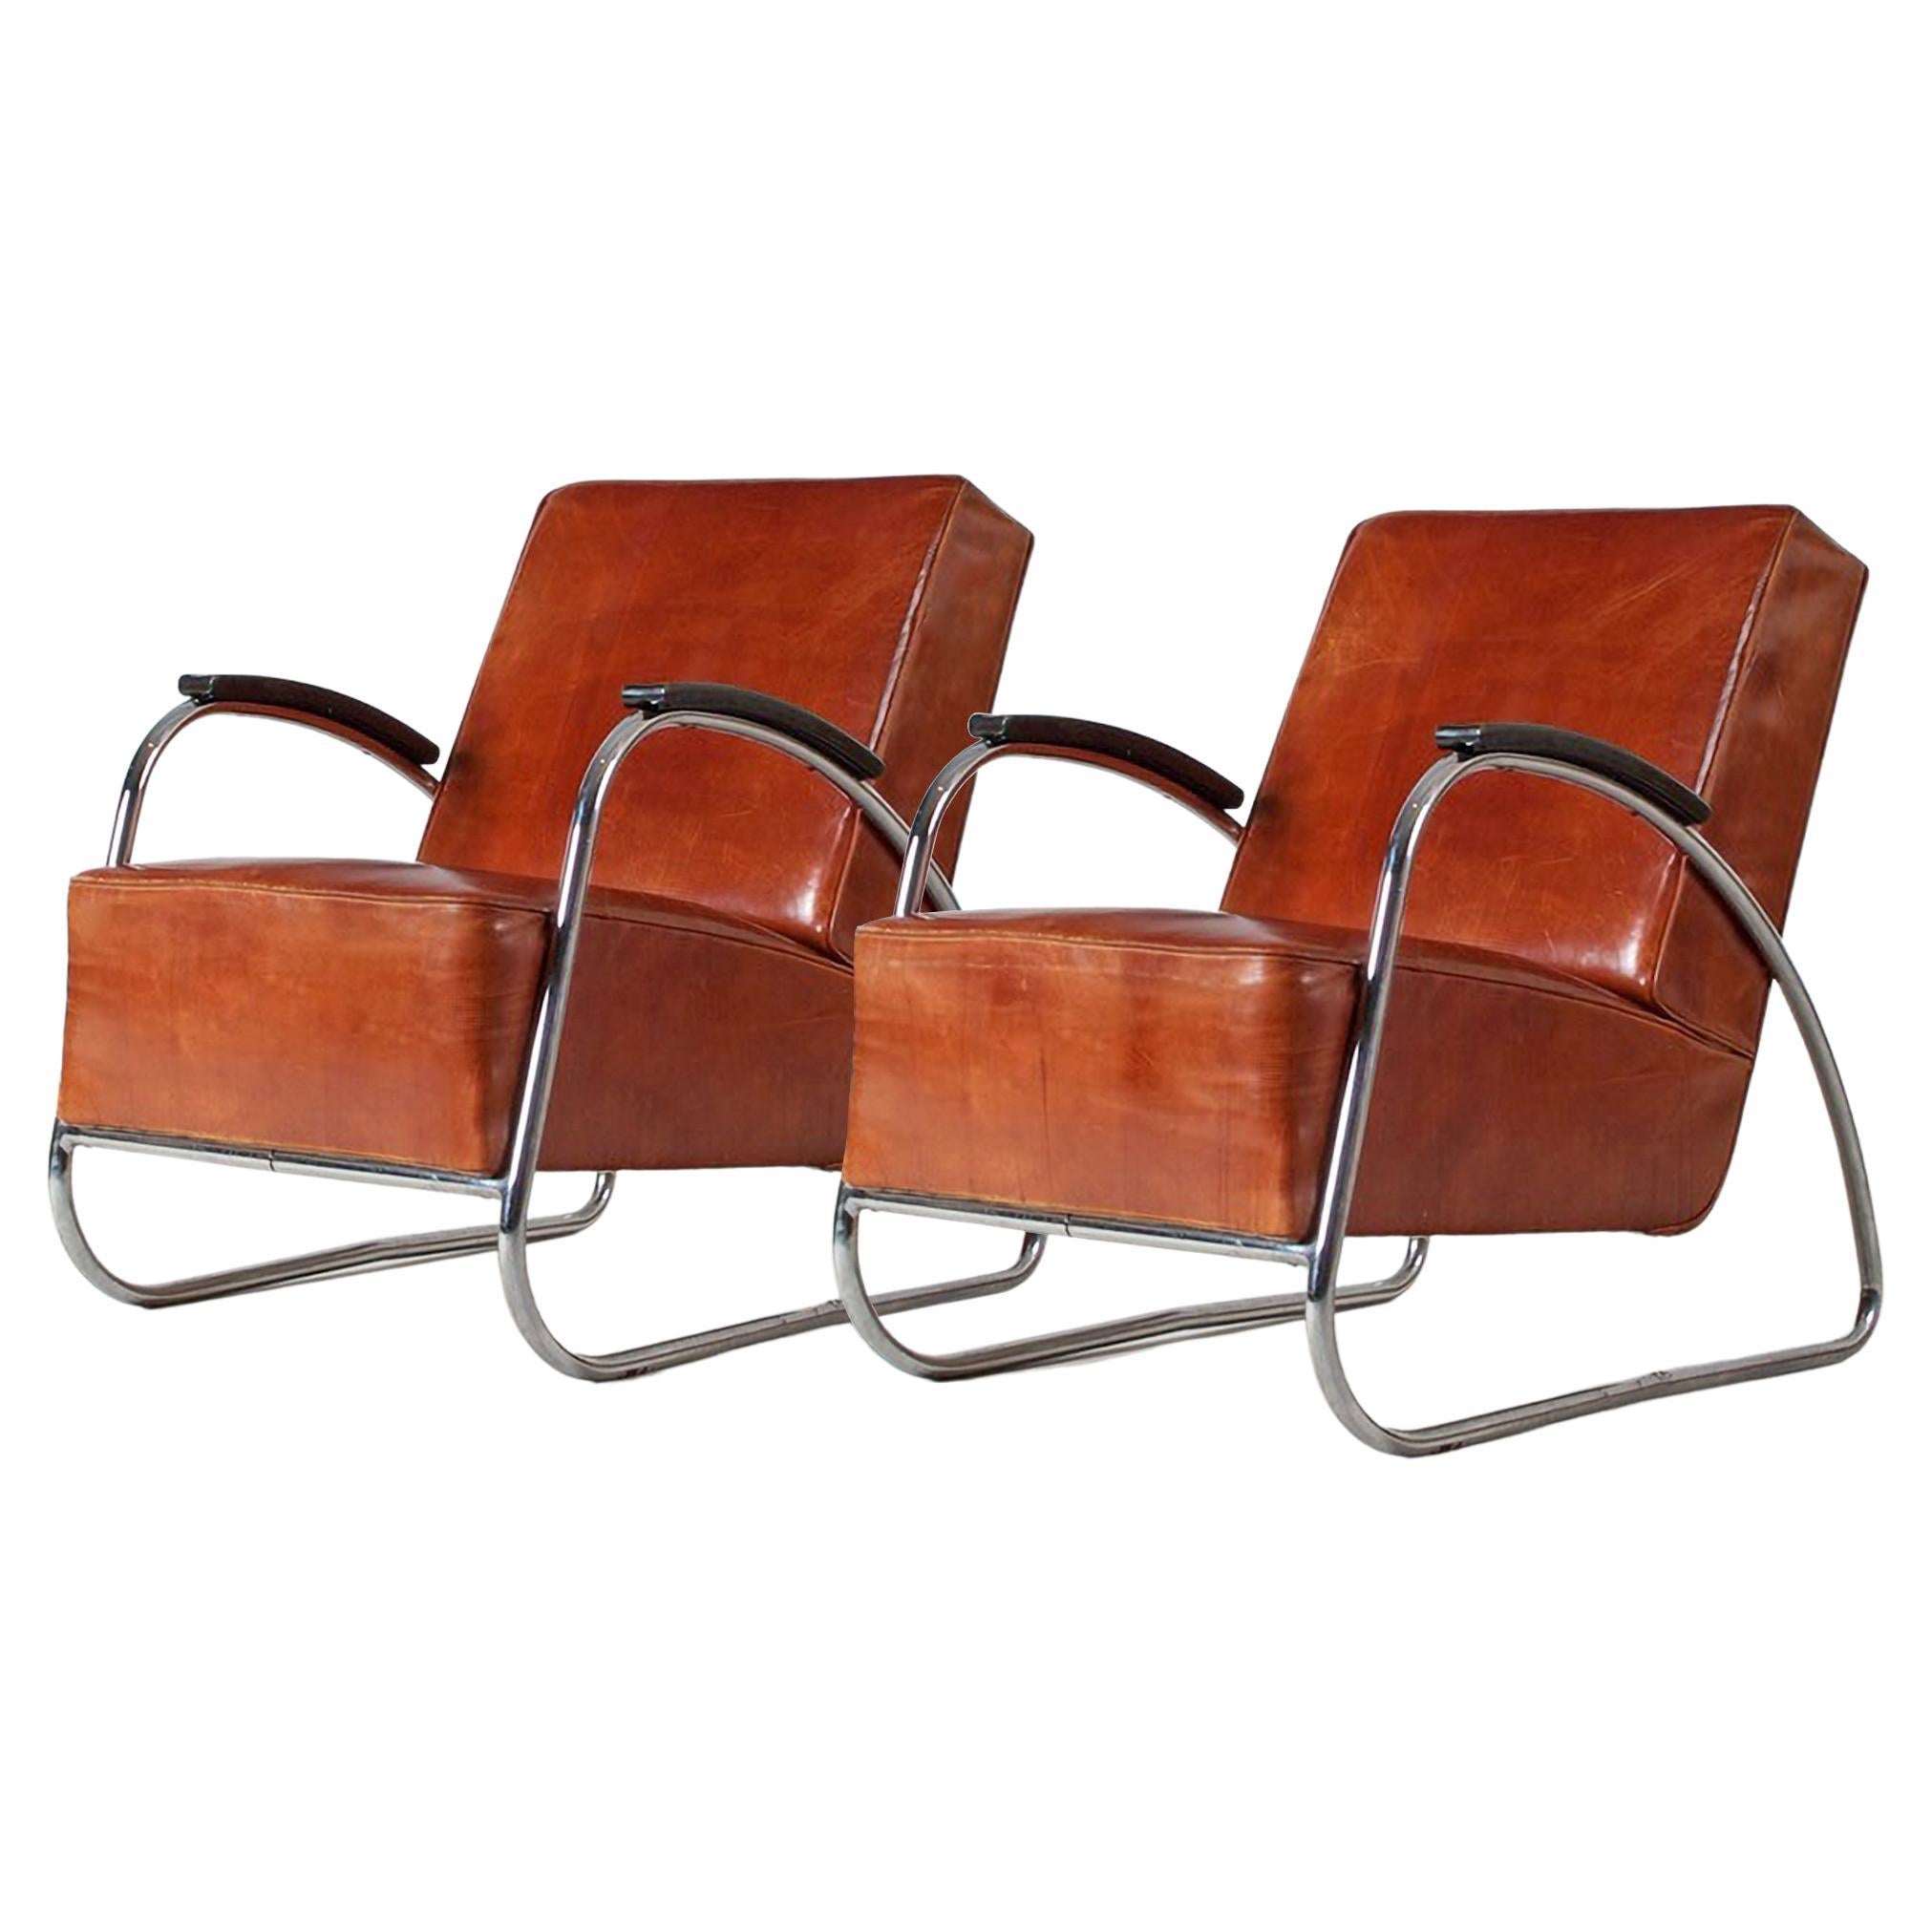 Customizable Modernist Club Chair by Mauser, Chromed Metal, Leather Upholstery